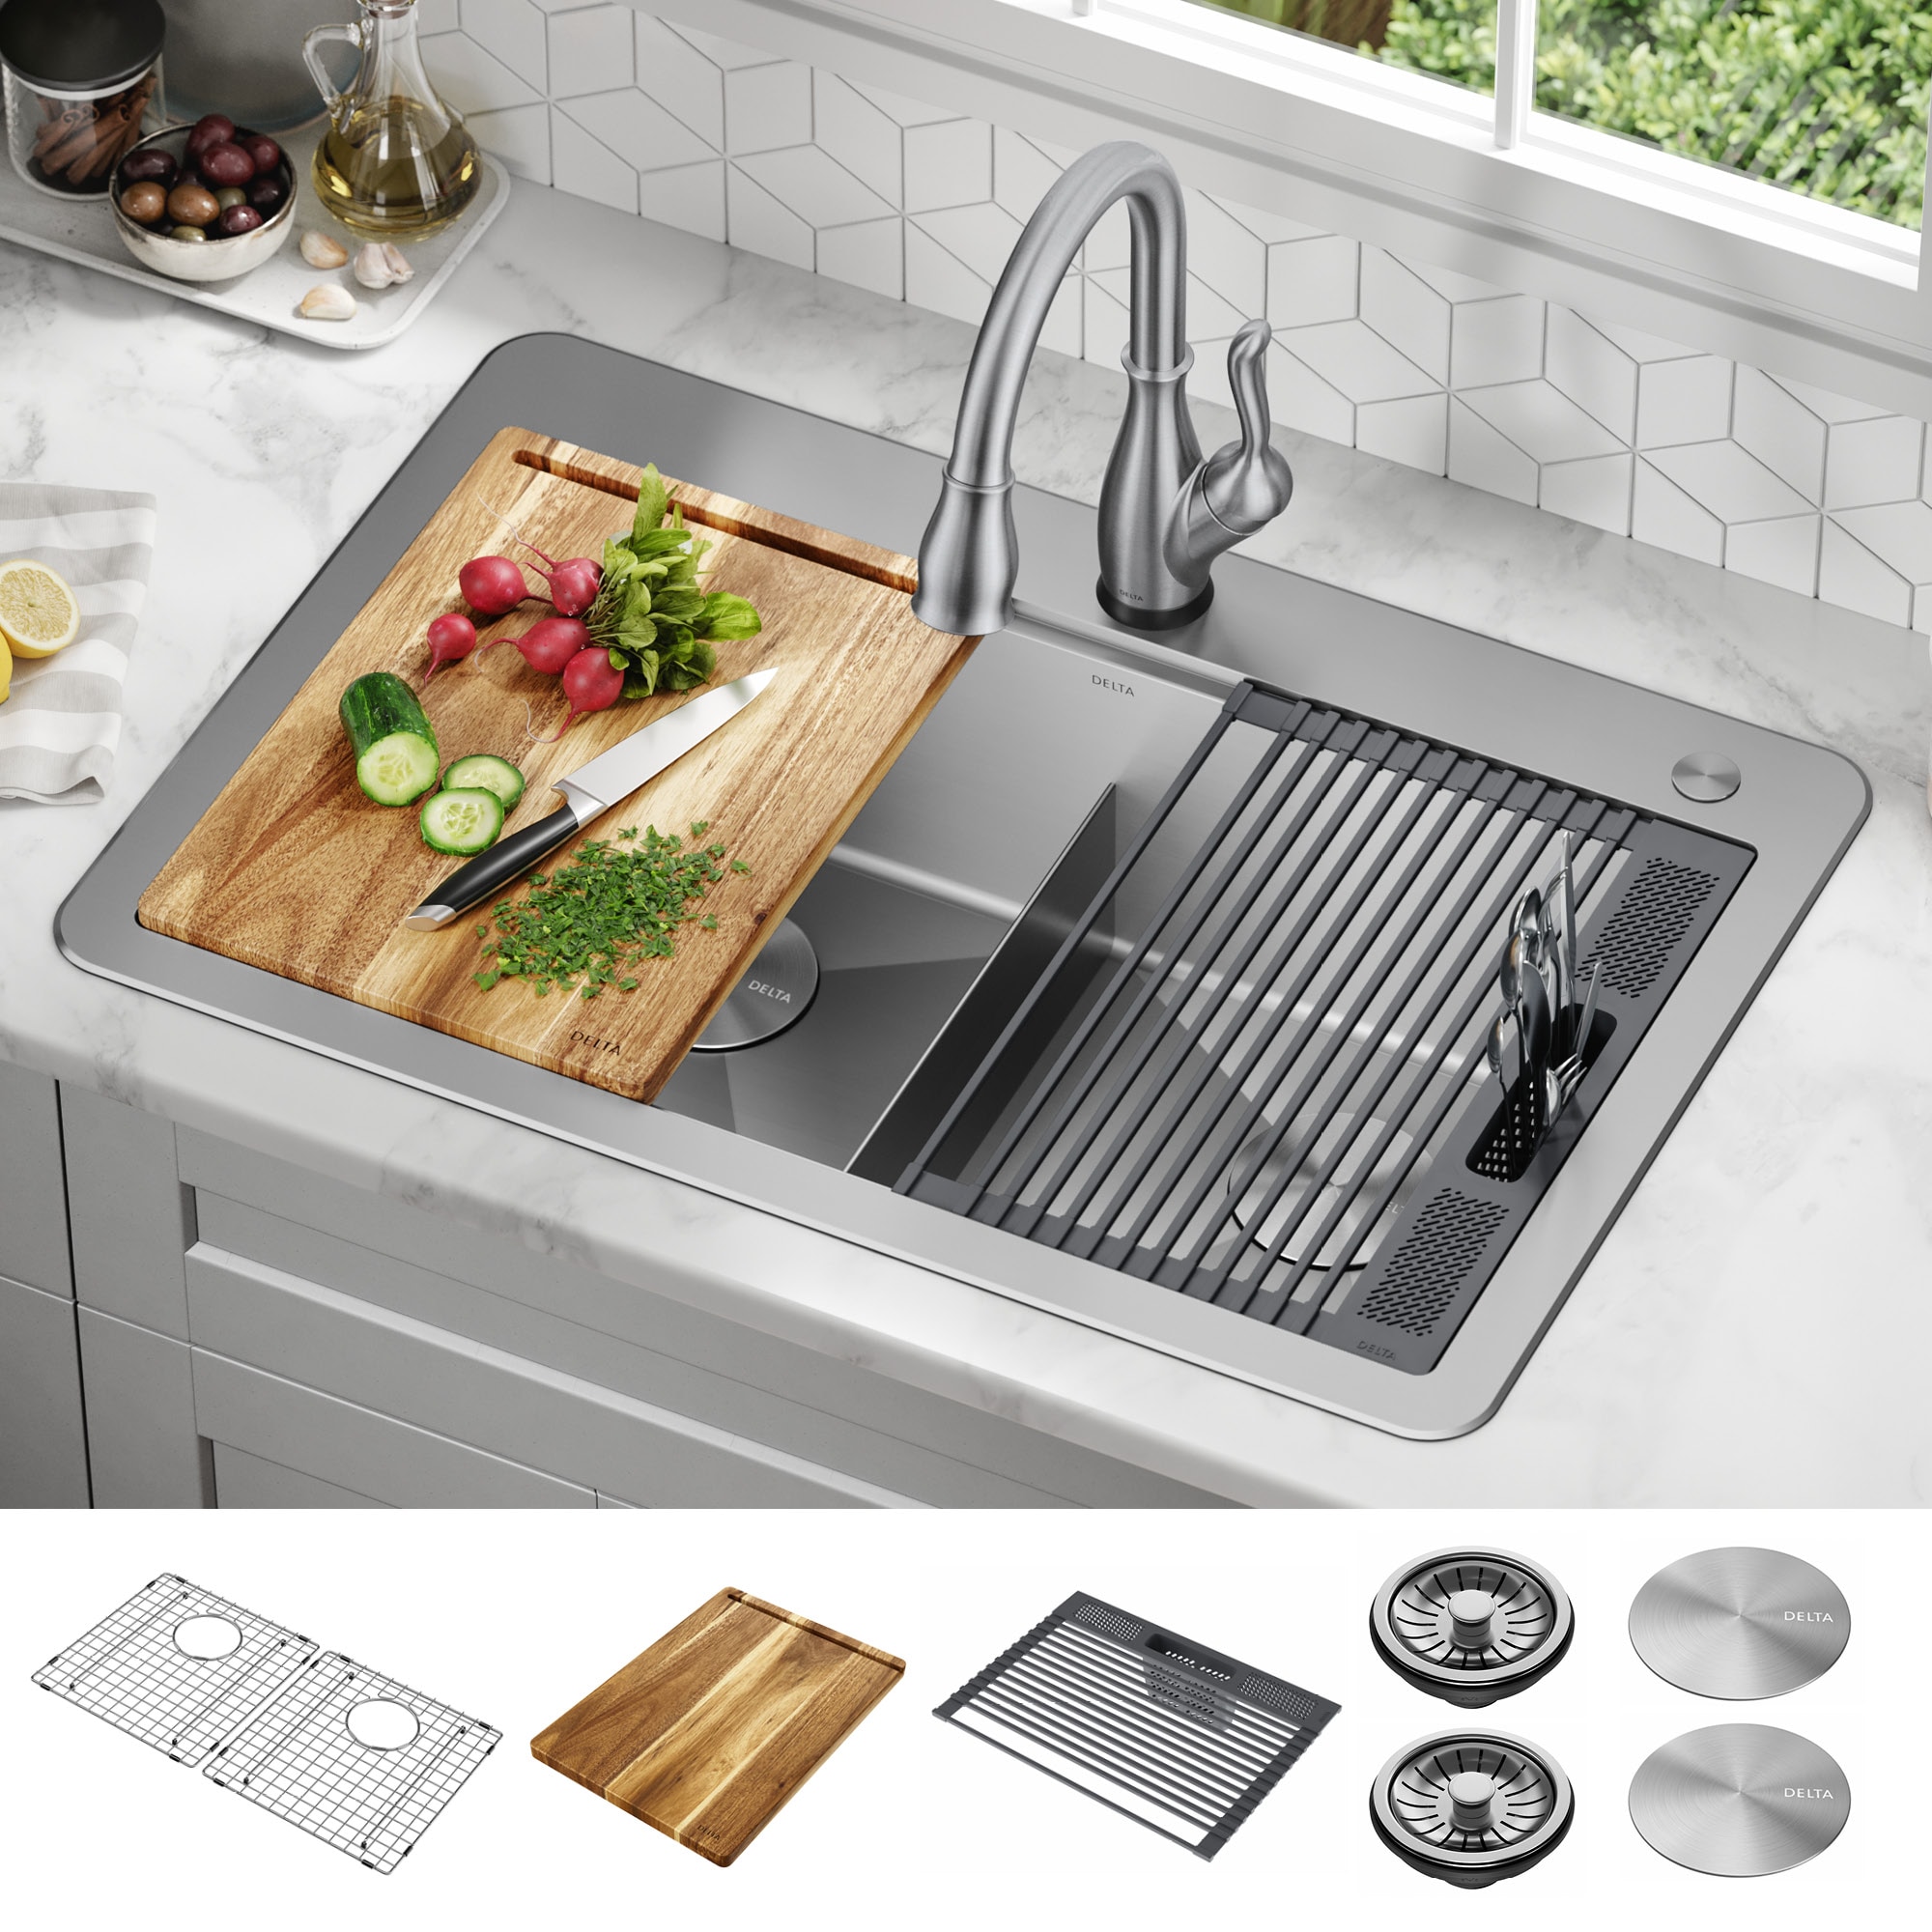 Delta Lorelai Drop In 255 in x 255 in Stainless Steel Double Equal Bowl  25 Hole Workstation Kitchen Sink with Drainboard